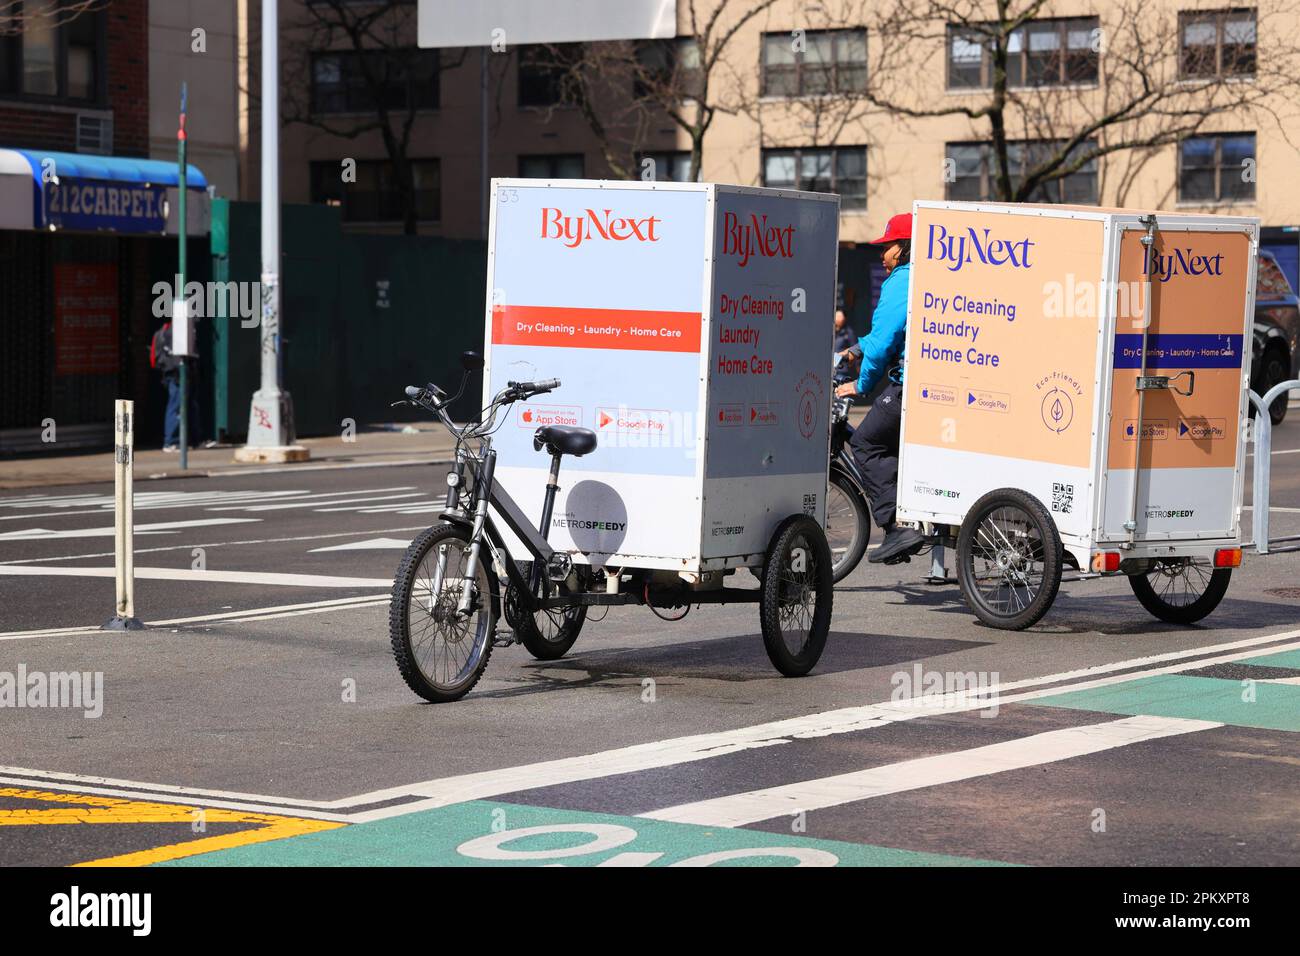 ByNext dry cleaning and laundry pedal assist electric cargo trikes, cargo bicycle in New York City. Stock Photo